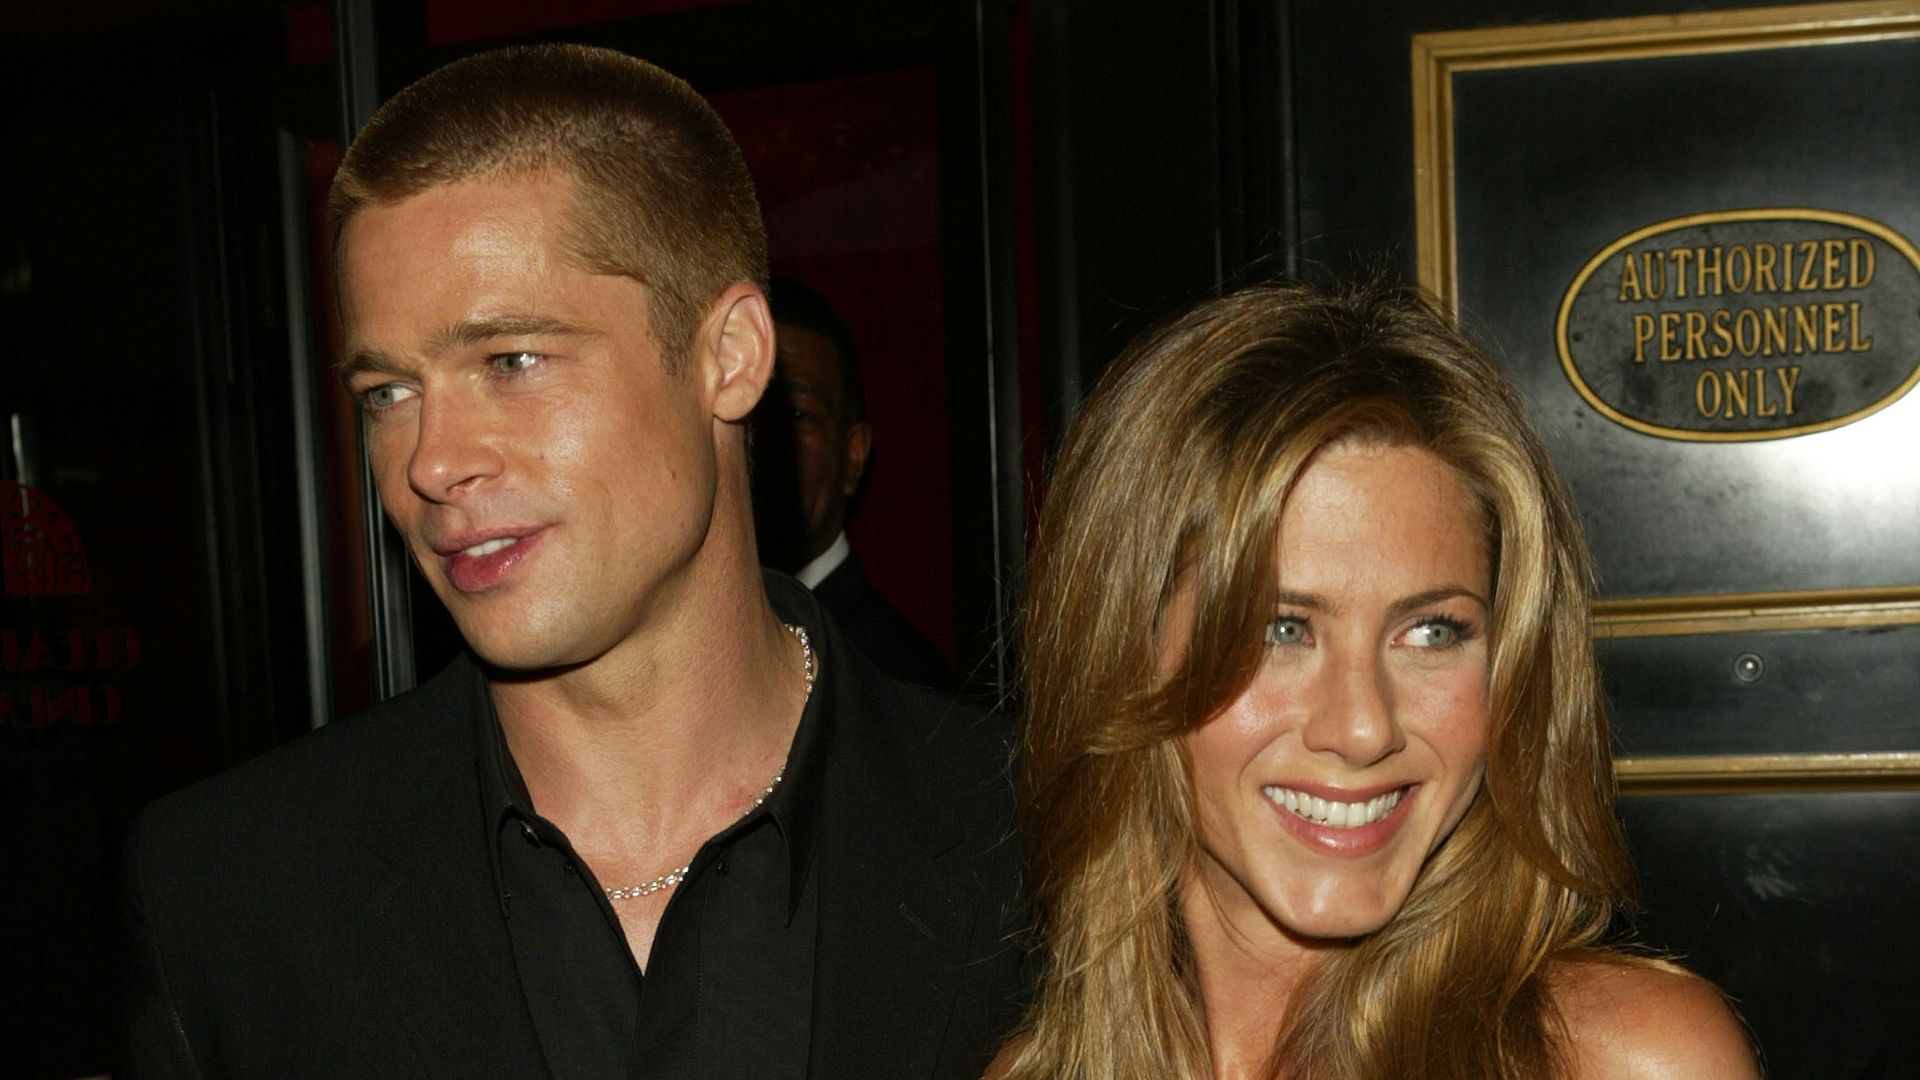 Brad Pitt and Jennifer Aniston attend the premiere of "Troy" on May 10, 2004 in New York City